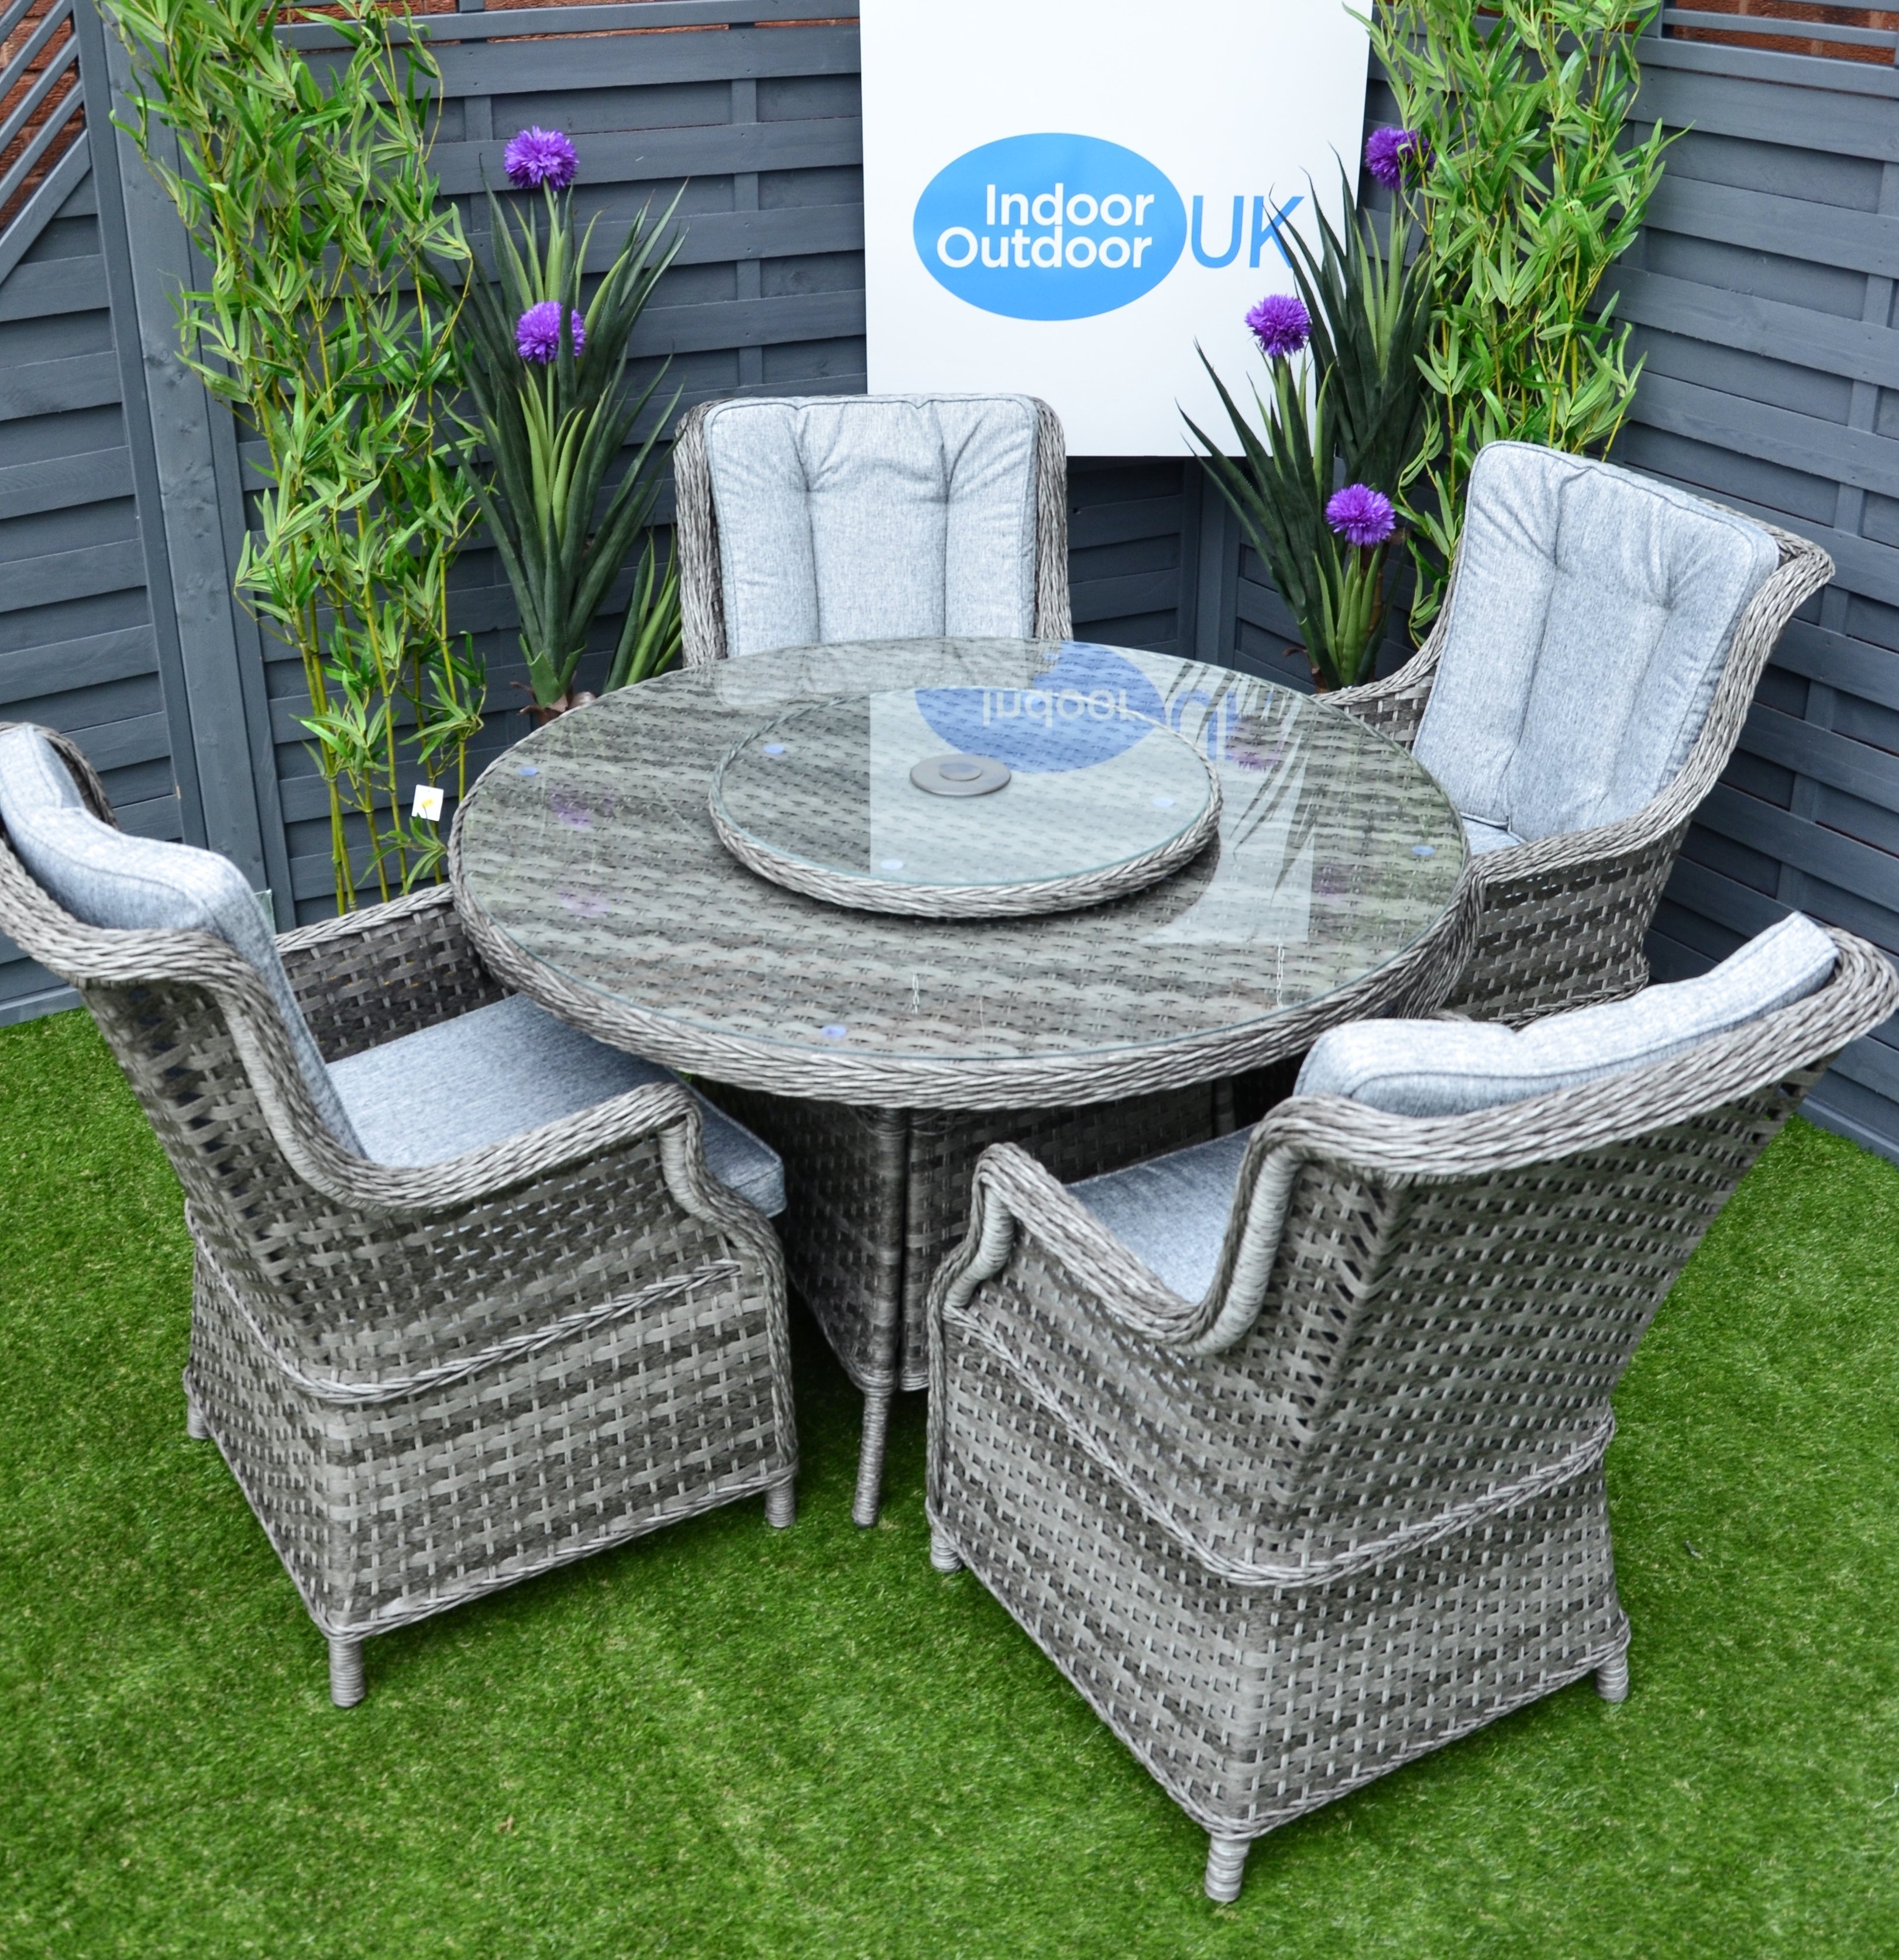 Hatherton Round Glass Top Rattan Dining Set 4 or 6 Seater- In Grey or Natural AVAILABITY 15th JULY – 6 seater dining set grey colour